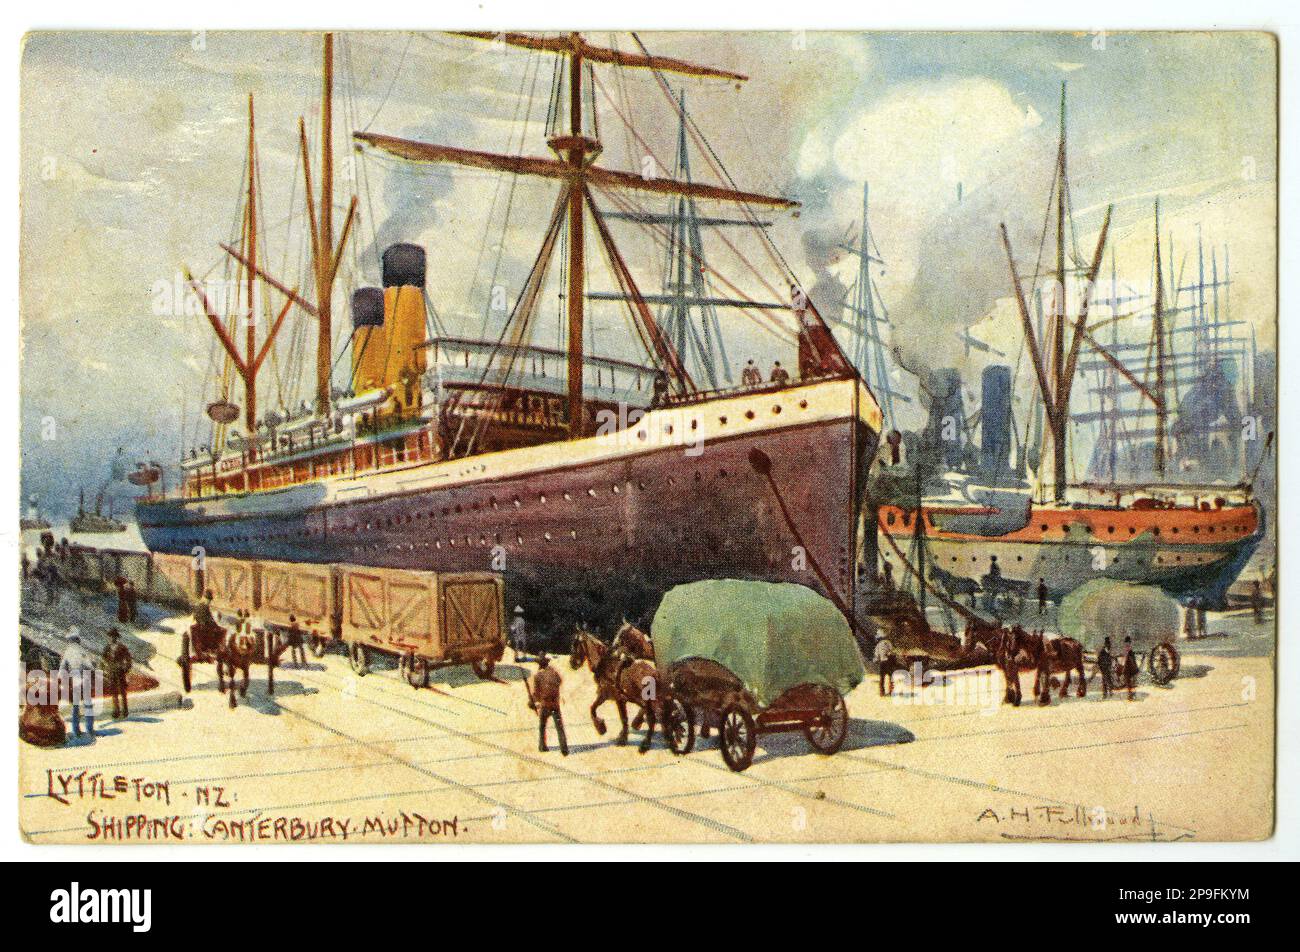 Postcard showing ships loading up with mutton at the Port of Lyttleton, near Christchurch, New Zealand, probably in the 1930s. Stock Photo